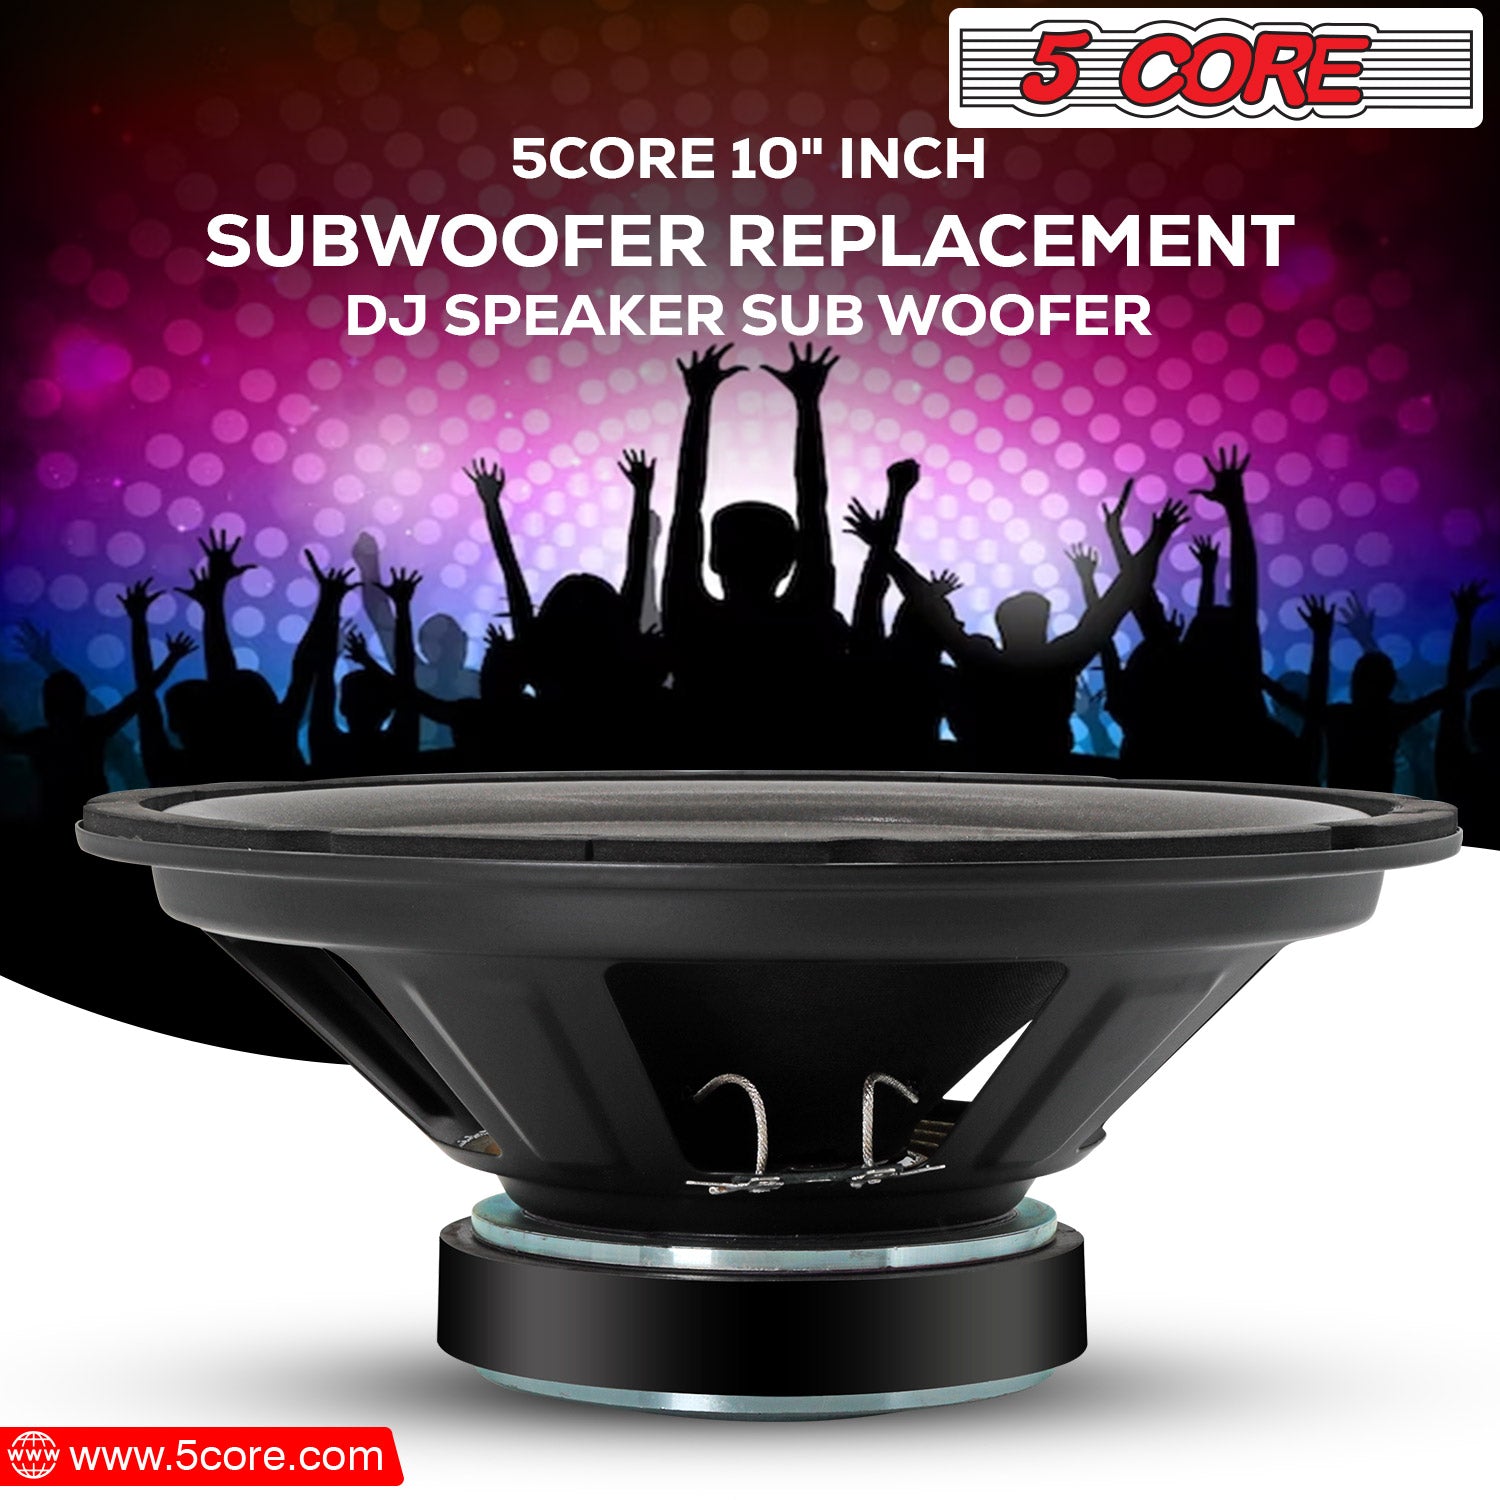 5 core 10" subwoofer replacement dj speaker sub woofer.